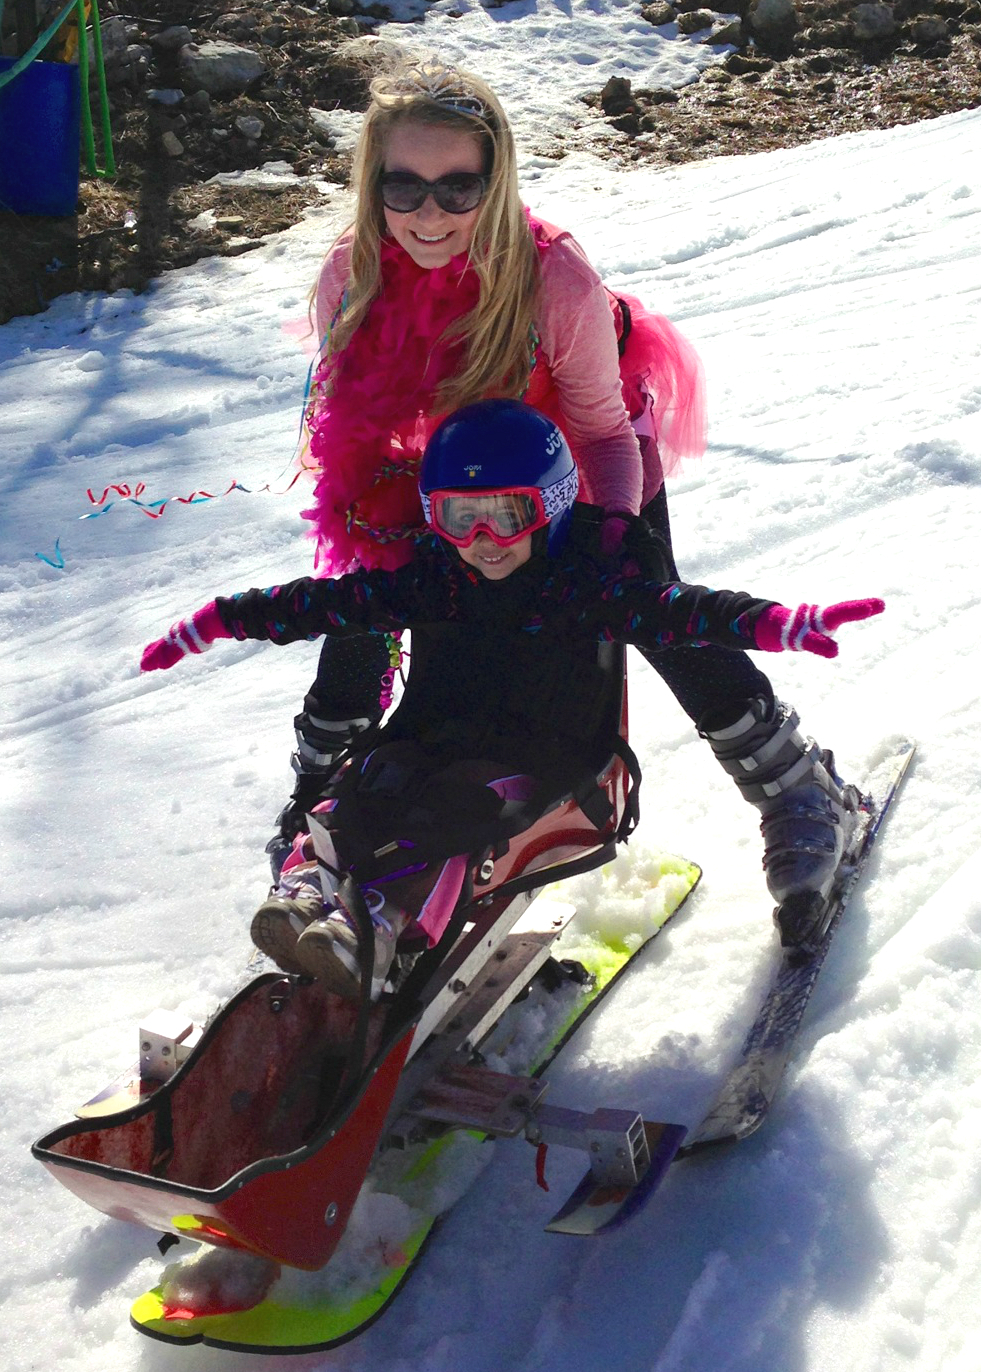 Bruno, skiing with a young client. Bruno coordinated UVA&#039;s adaptive ski program through Madison House.